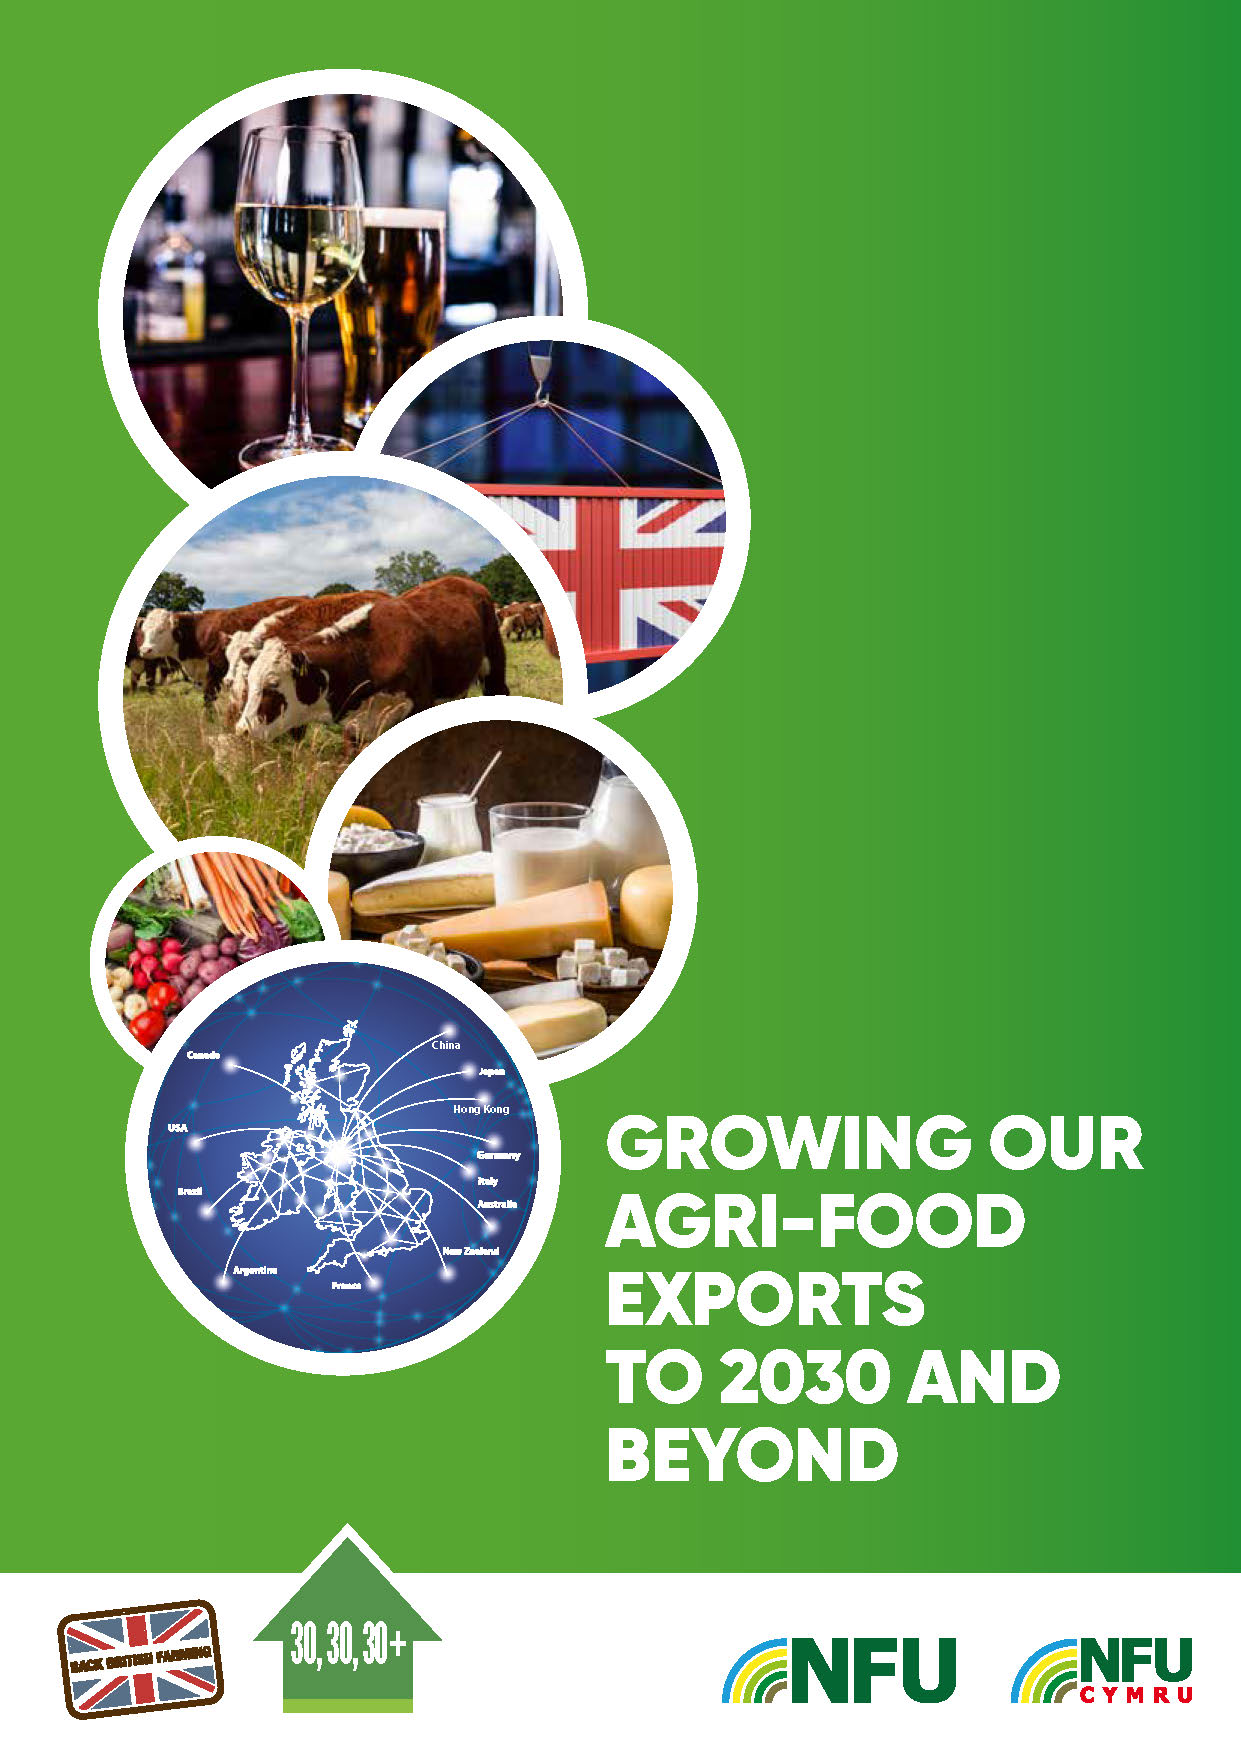 The NFU has outlined its export strategy to grow the UK’s agri-food exports by 30% by 2030, bringing the total value of UK agri-food exports to over £30 billion. The new ’30, 30, 30+’ ambition is designed to be achieved in partnership with government and should be a driving force to showcase the fantastic British brand and put British food on plates across the world. 
